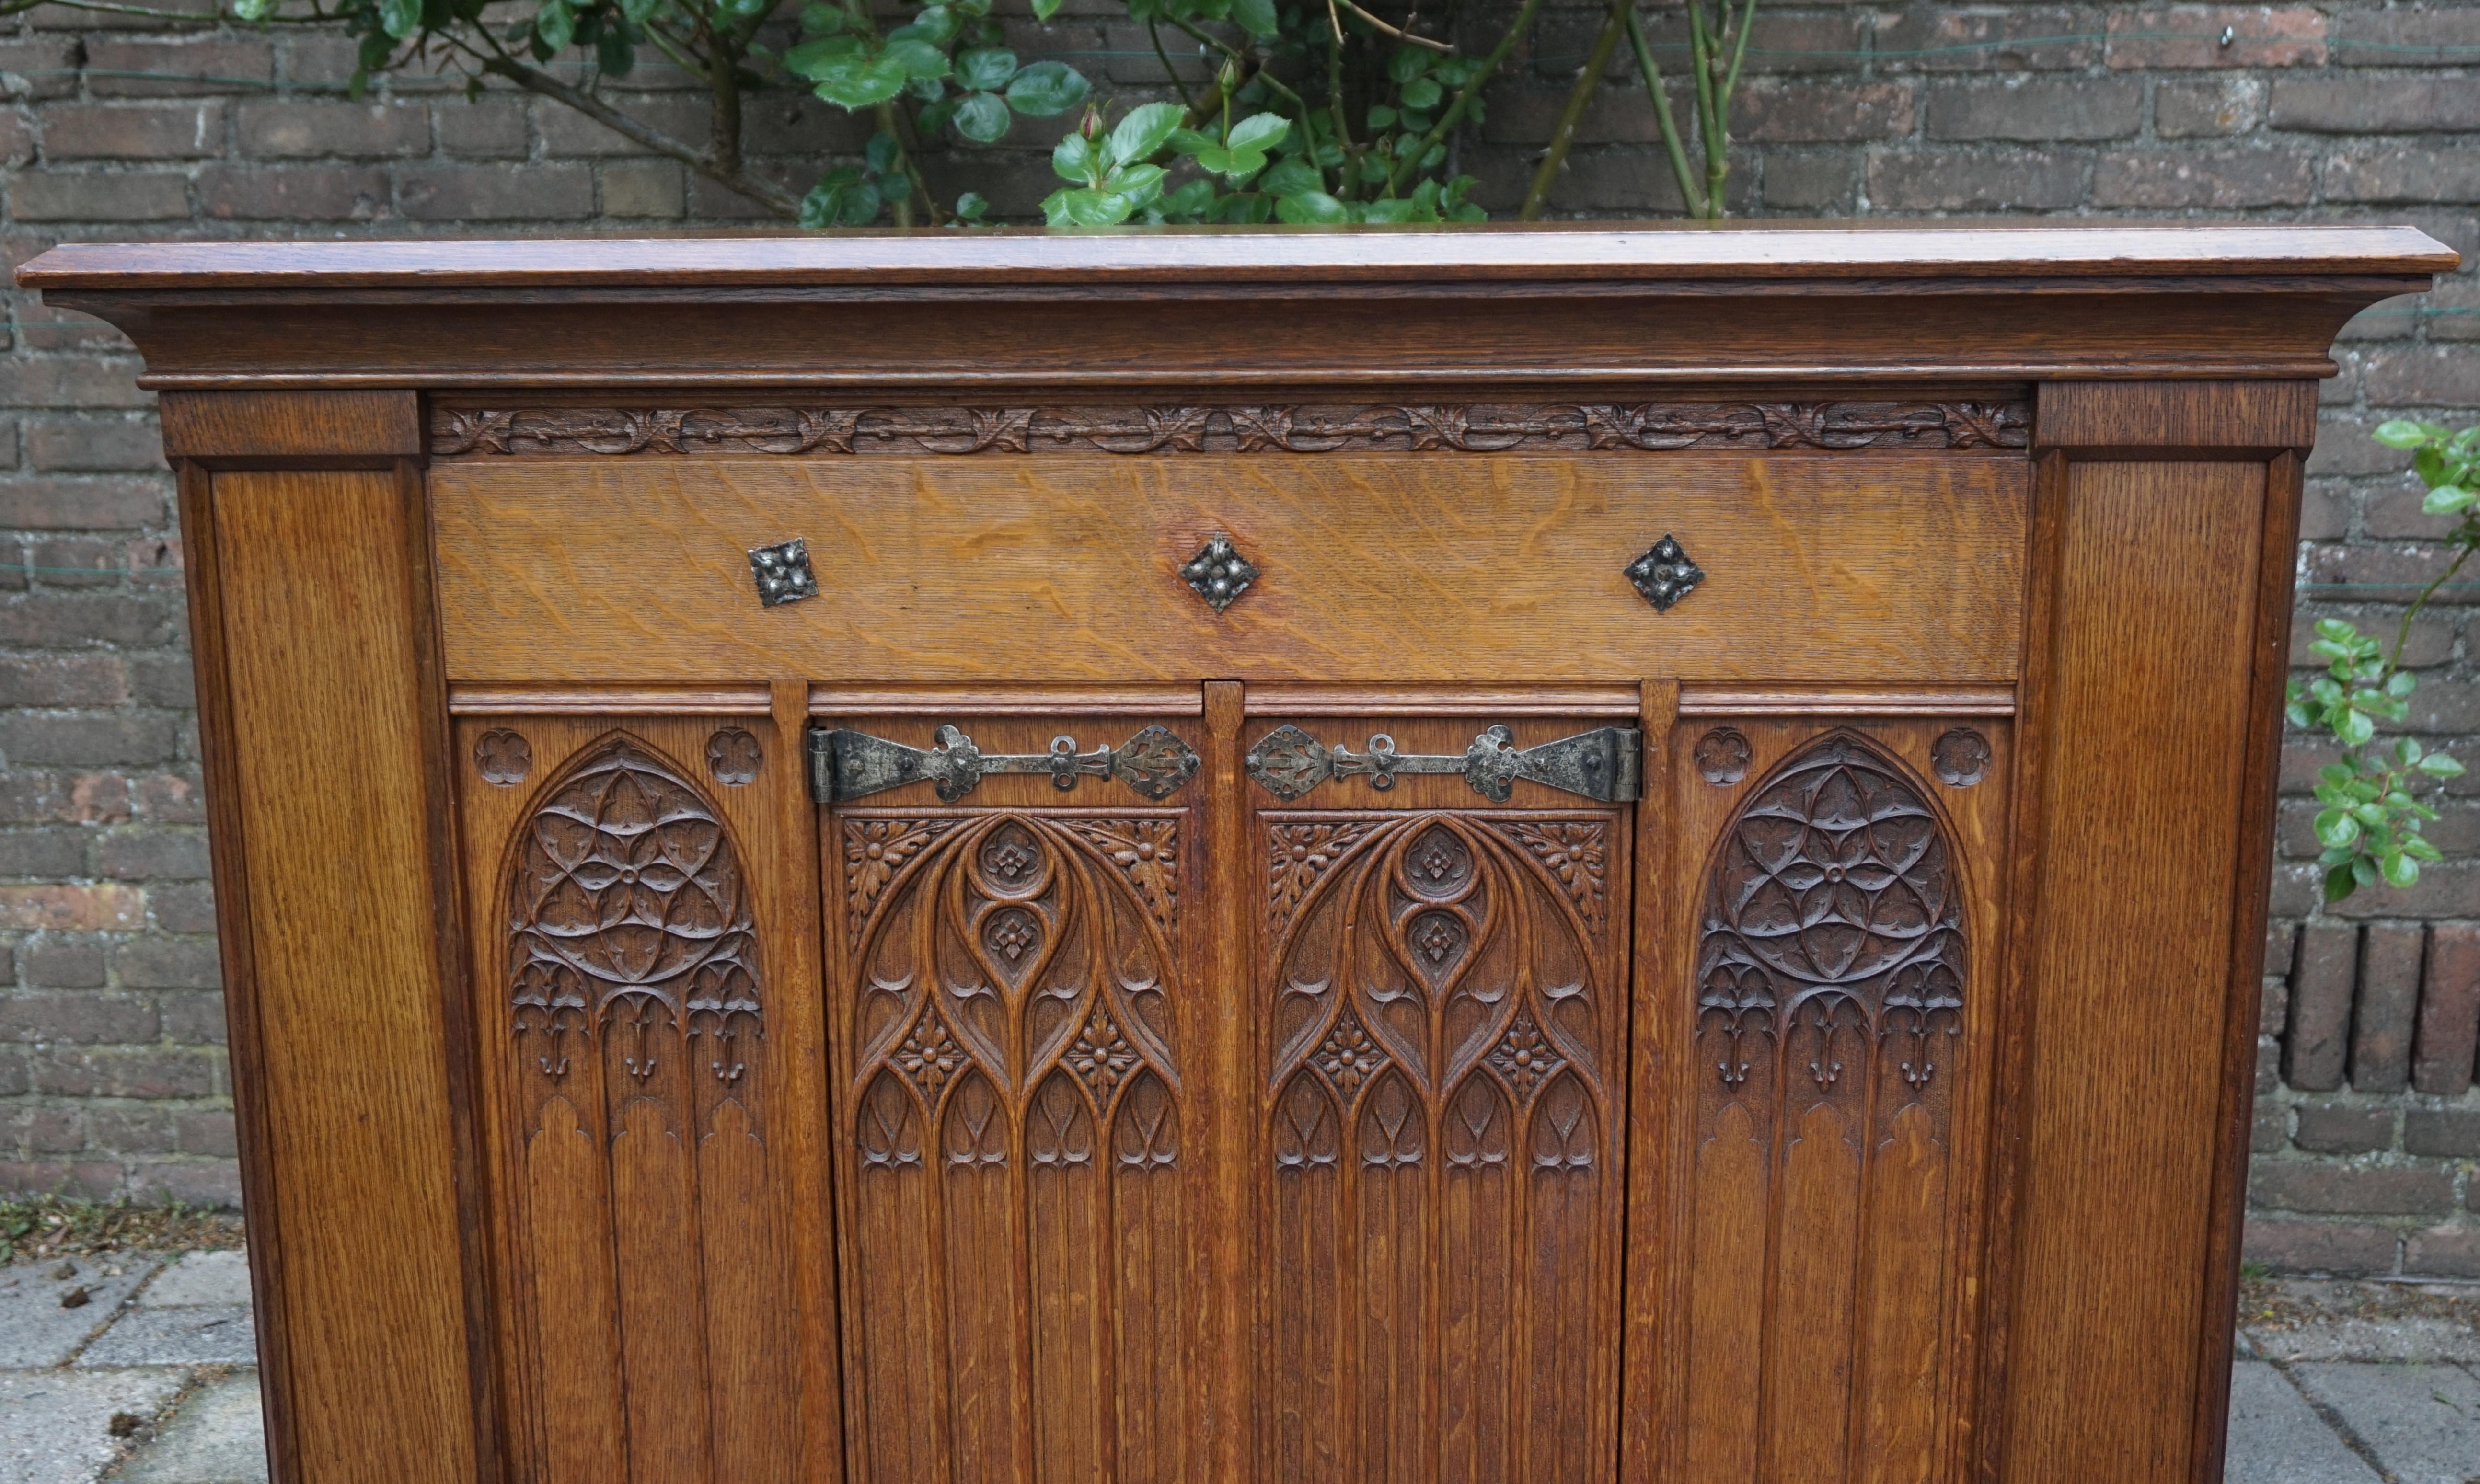 Antique Gothic Revival Credenza Sideboard Cabinet W. Hand Carved Church Windows 8